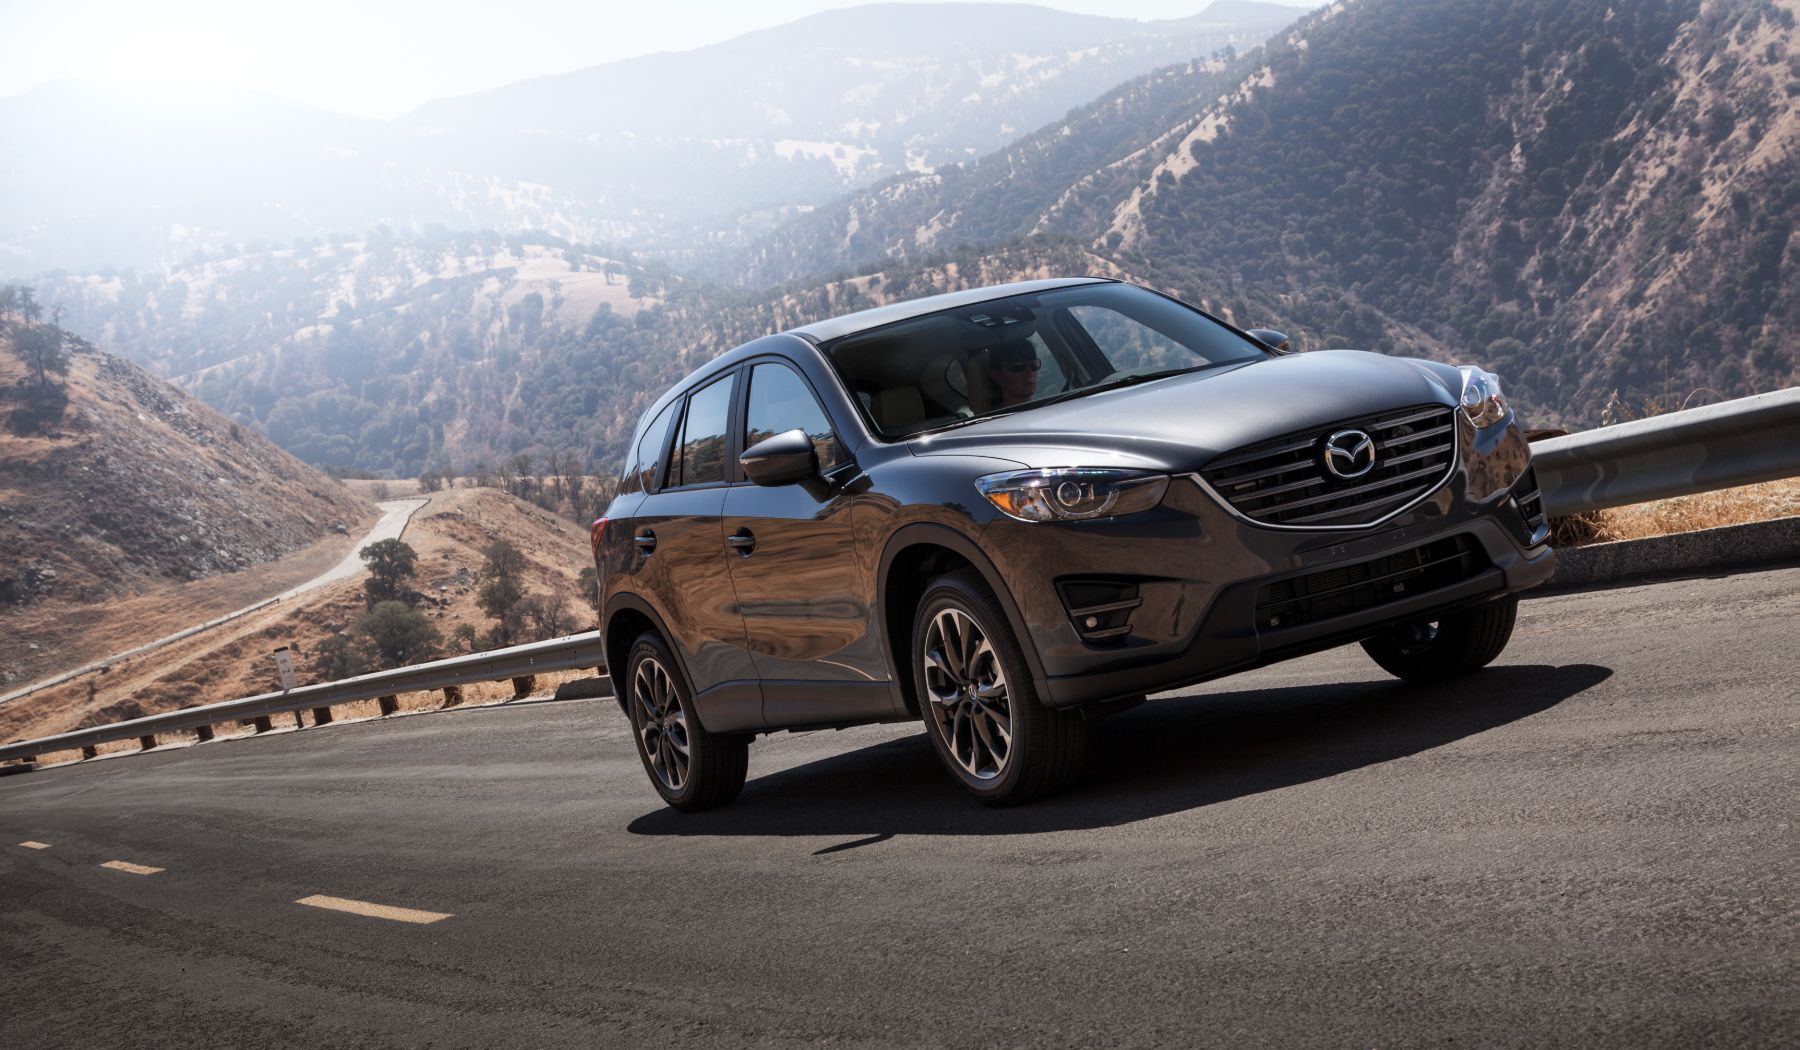 Looking For A Used First Generation Mazda Cx 5 Here Are The Most